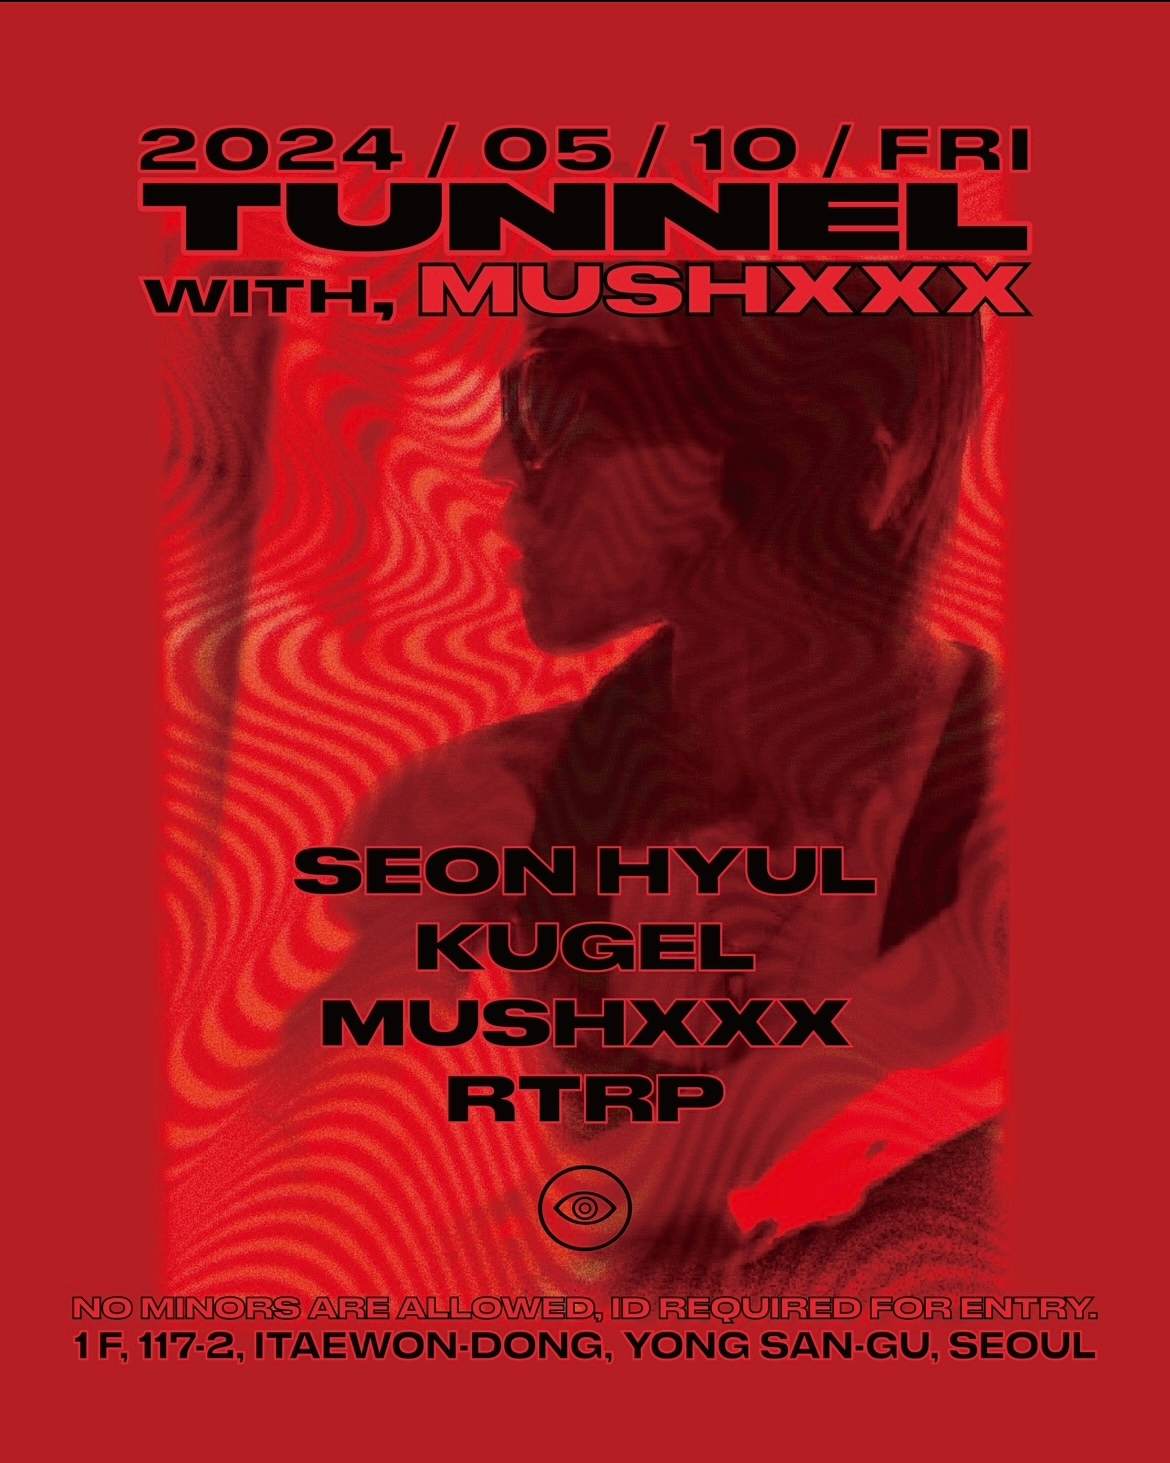 [TUNNEL SEOUL] Tunnel with MUSHXXX - Página frontal